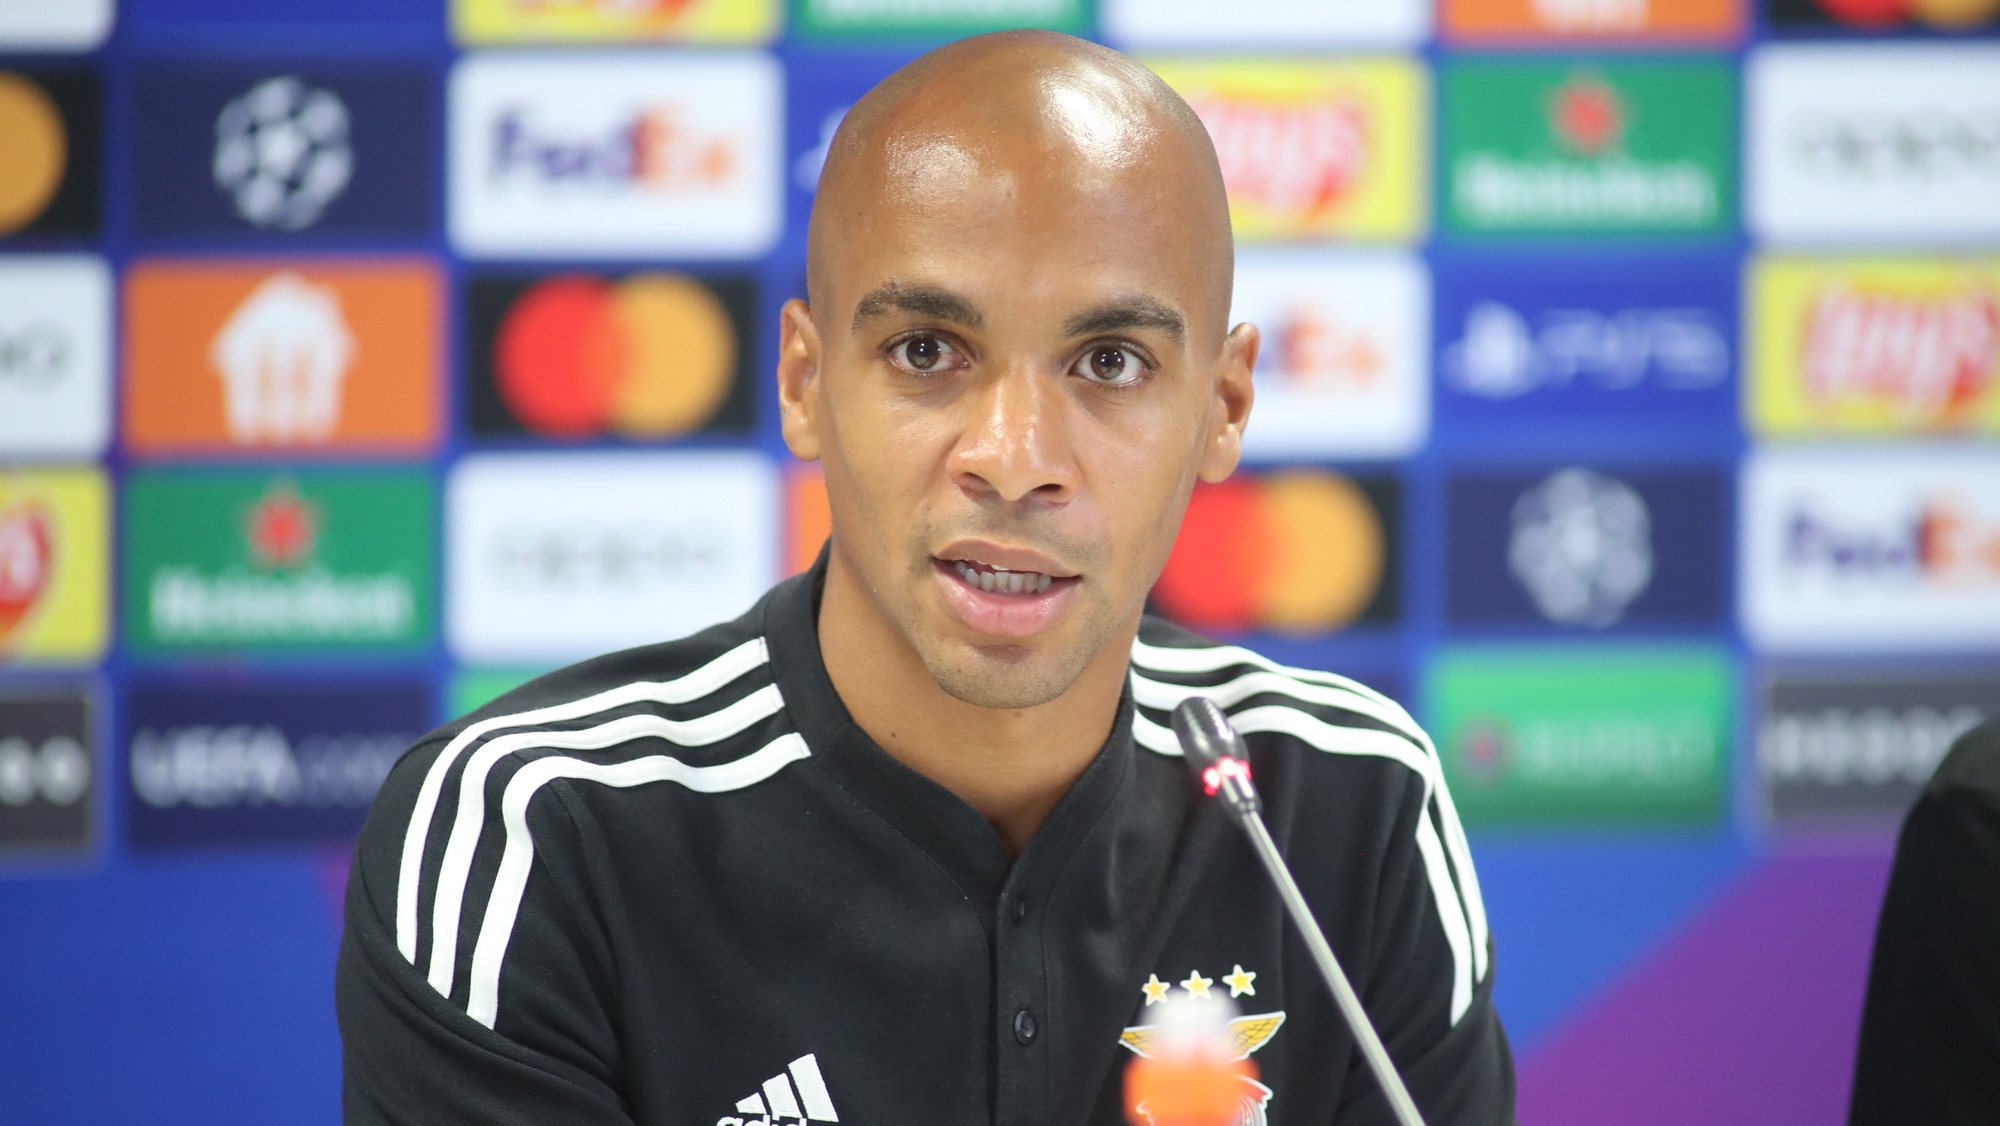 epa10124528 Benfica&#039;s player Joao Mario attends a press conference in Lodz, Poland, 16 August 2022. SL Benfica will face Dynamo Kiev in the fourth qualifying round of the UEFA Champions League soccer match on 17 August 2022 in Lodz.  EPA/Roman Zawistowski POLAND OUT